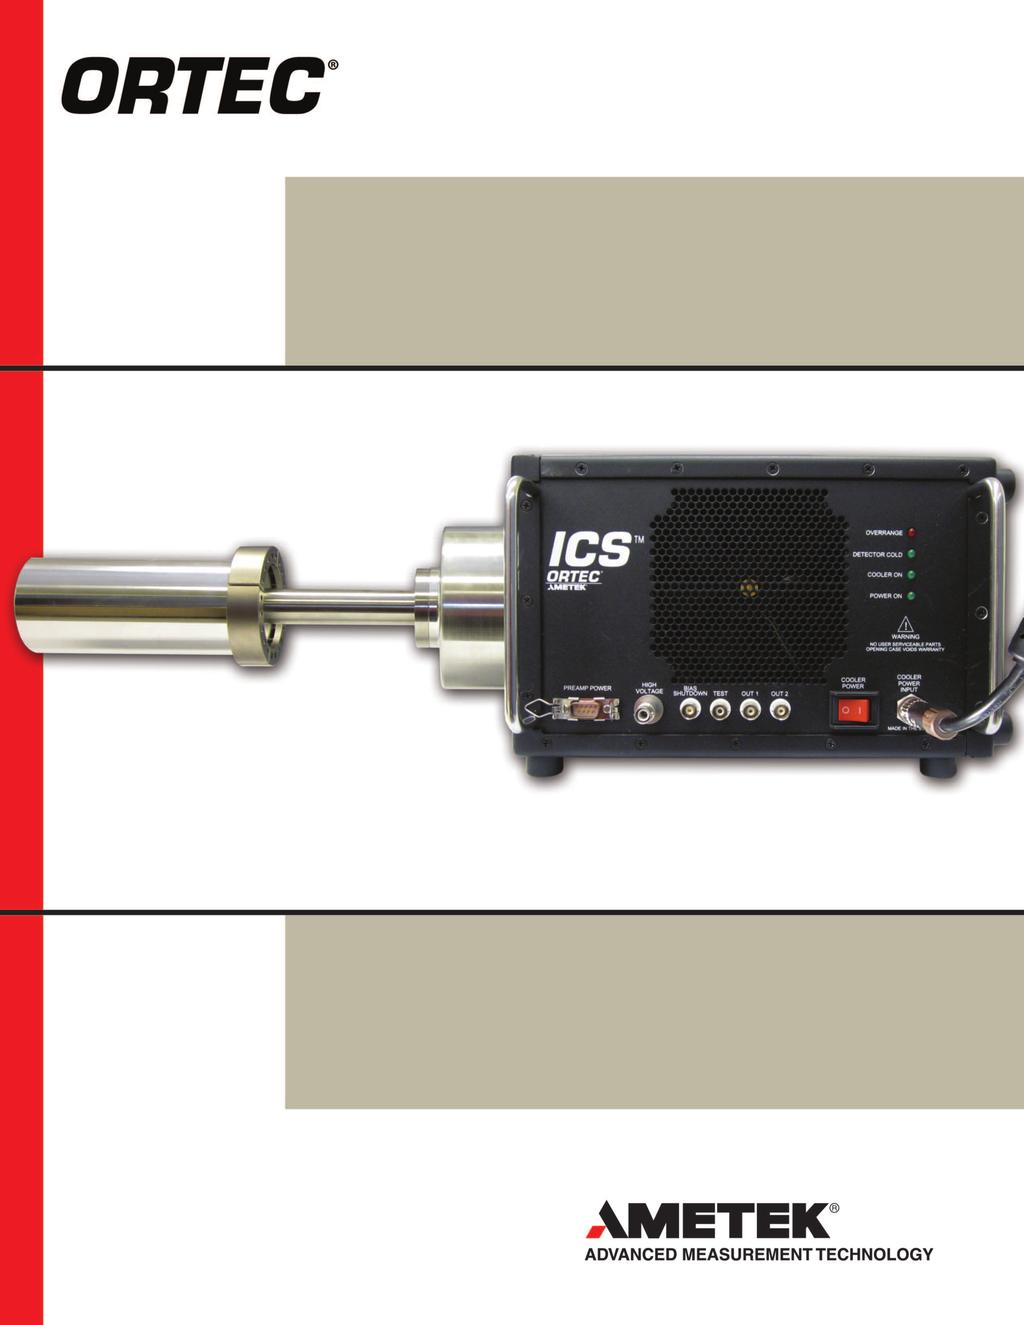 ICS Integrated Cryocooling System Premium detector resolution and LN 2